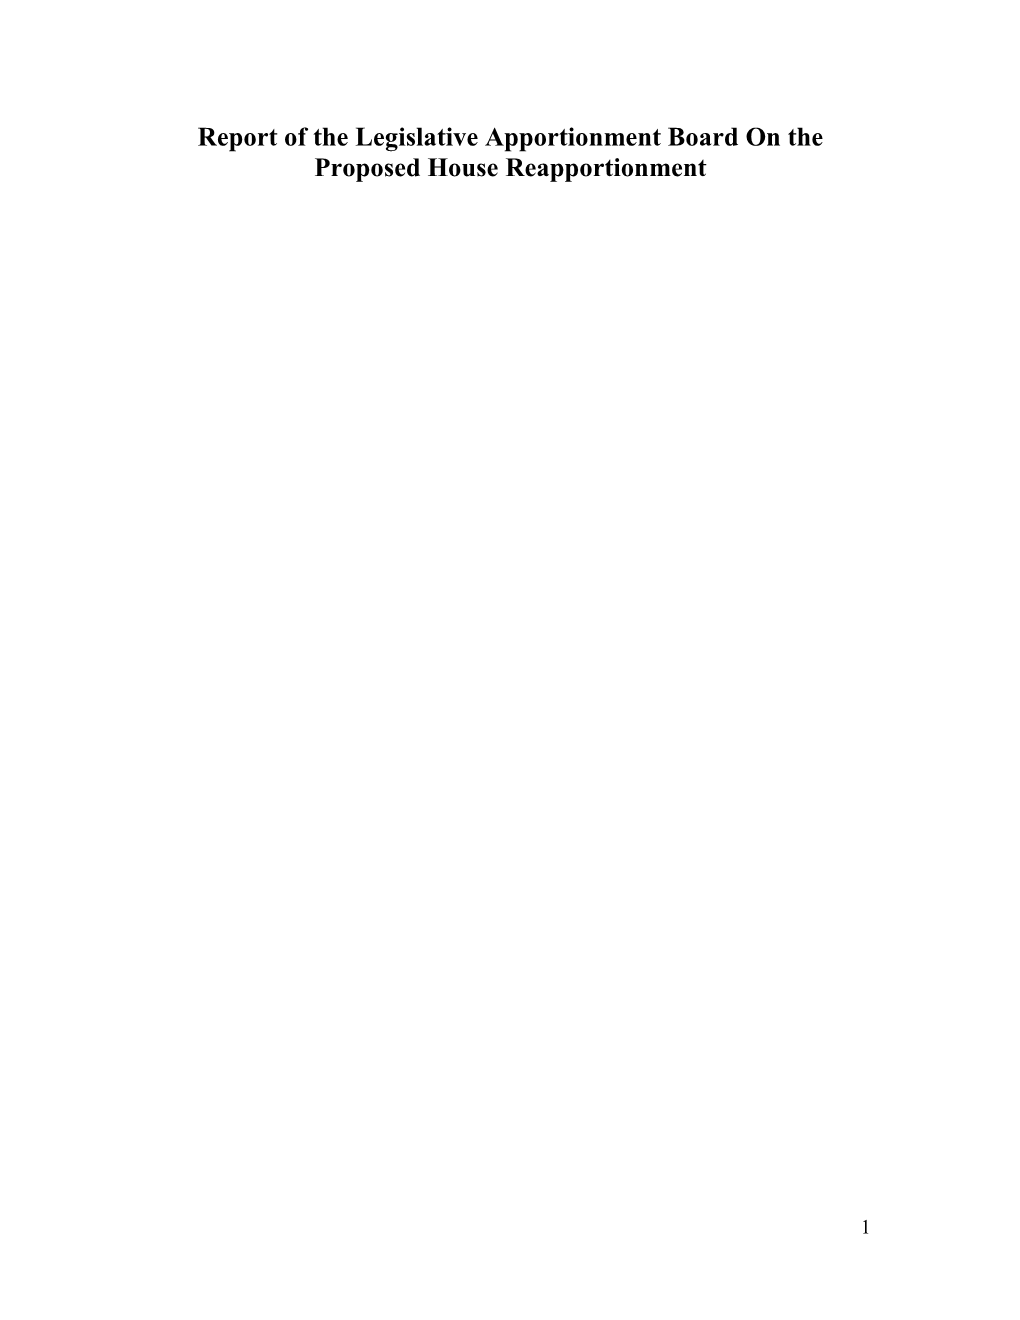 Report of the Legislative Apportionment Board on the Proposed House Reapportionment